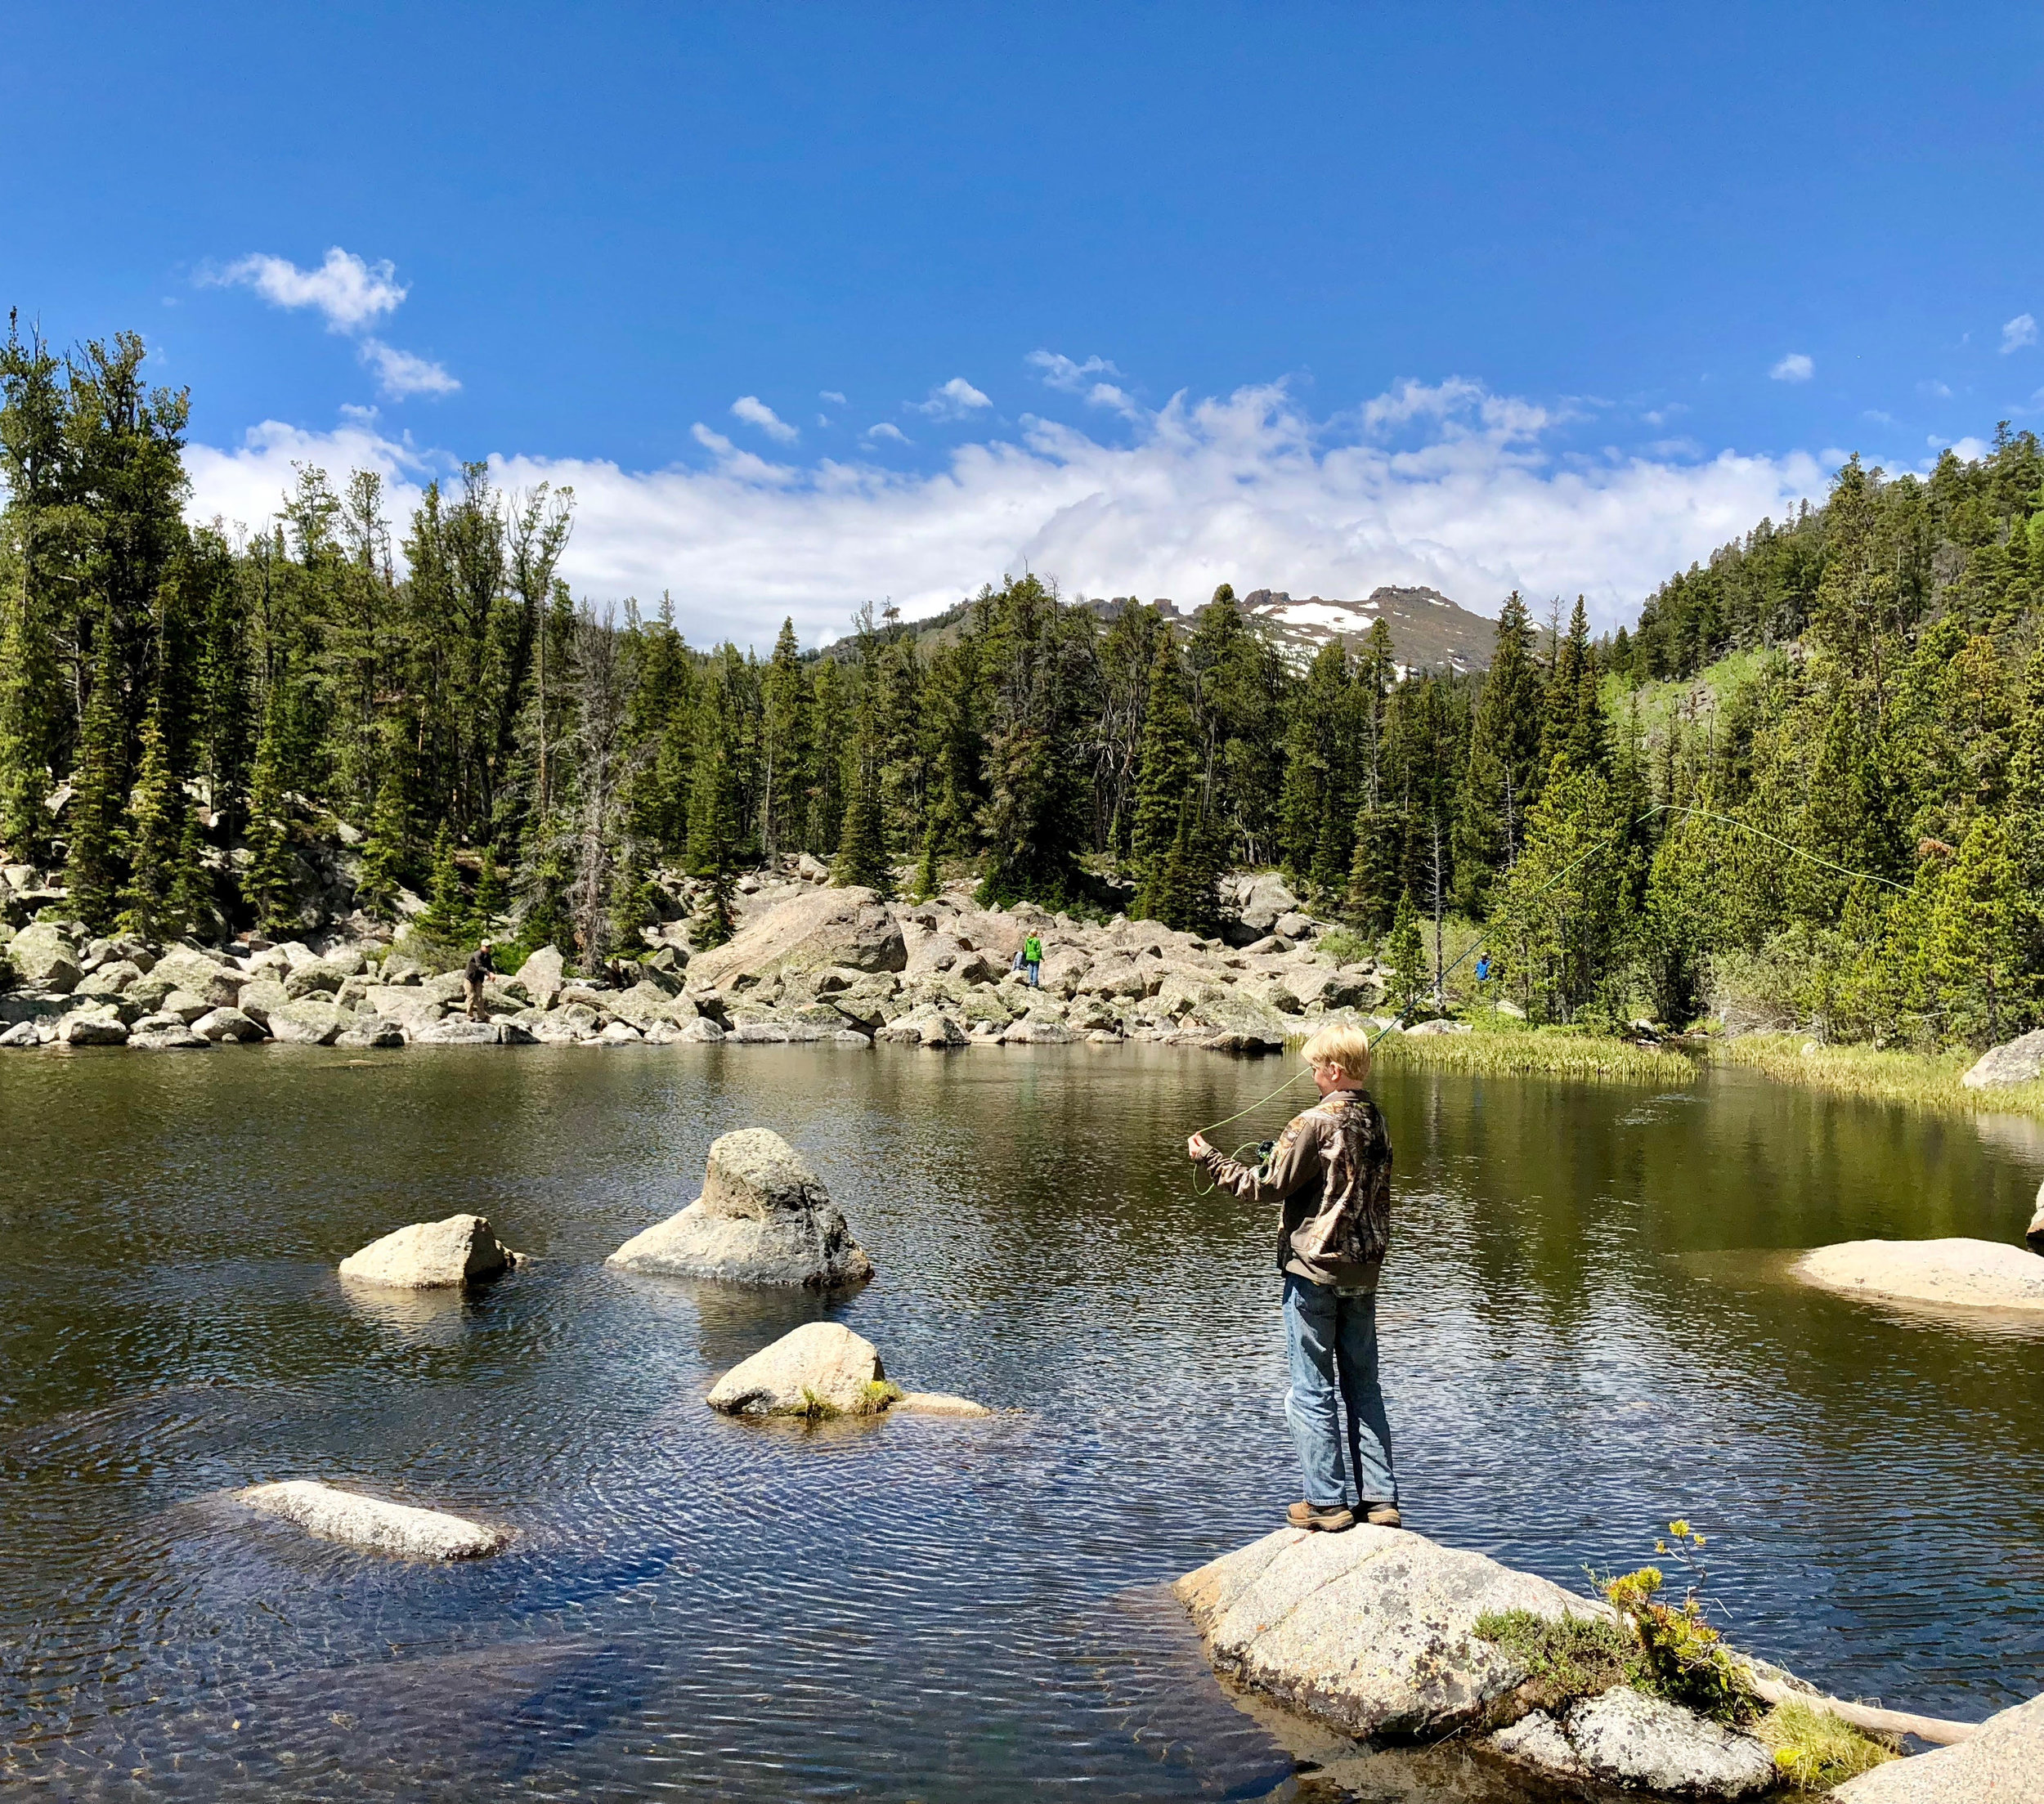 Fly Fishing Wyoming: The Wind River Range – FLY ALL SZN